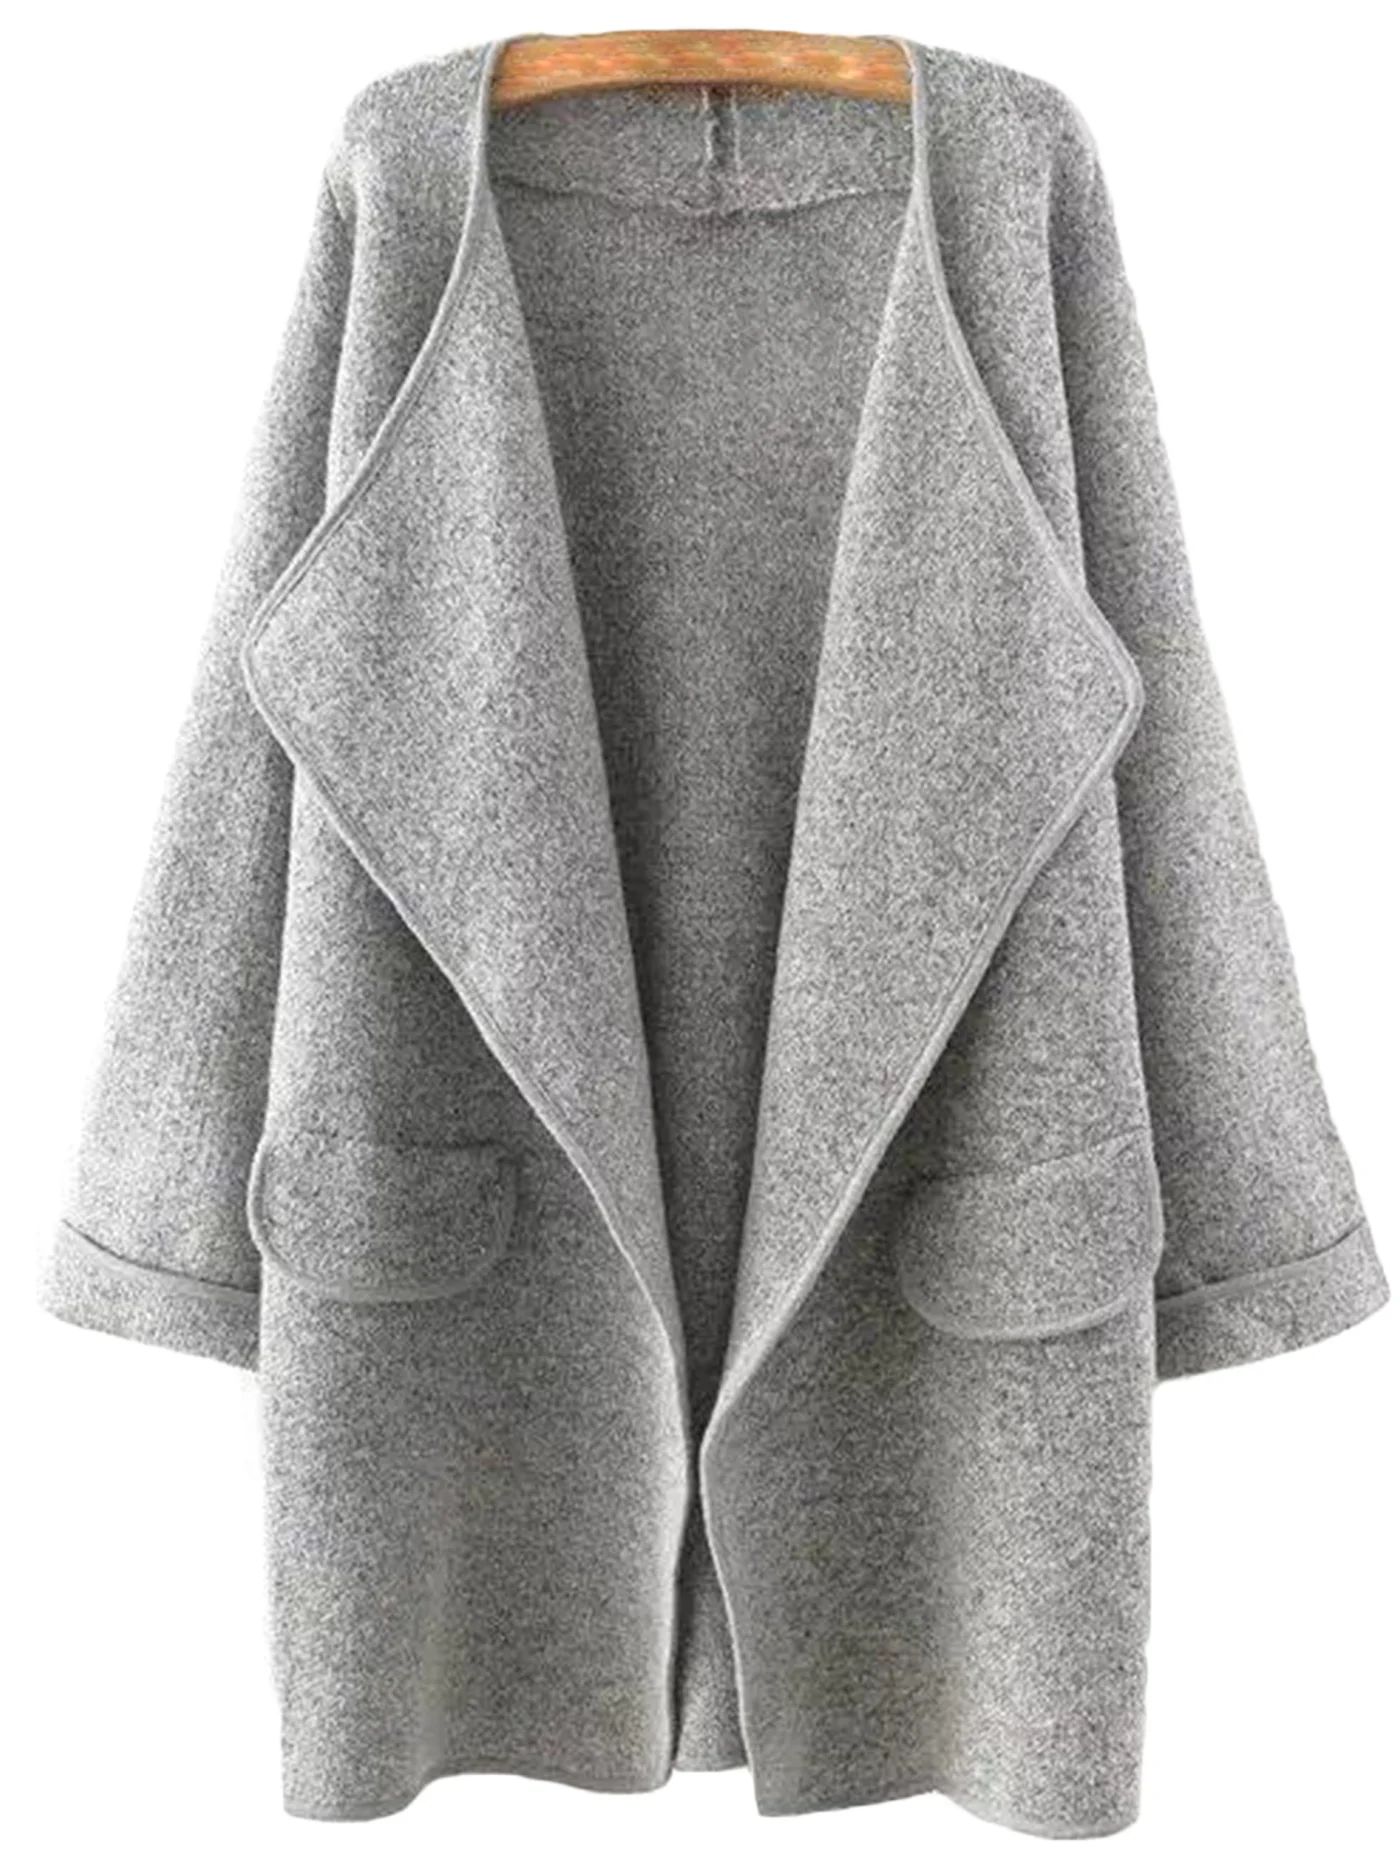 'Tami' Marl Knit Wrapped Open Cardigan (4 Colors) | Goodnight Macaroon